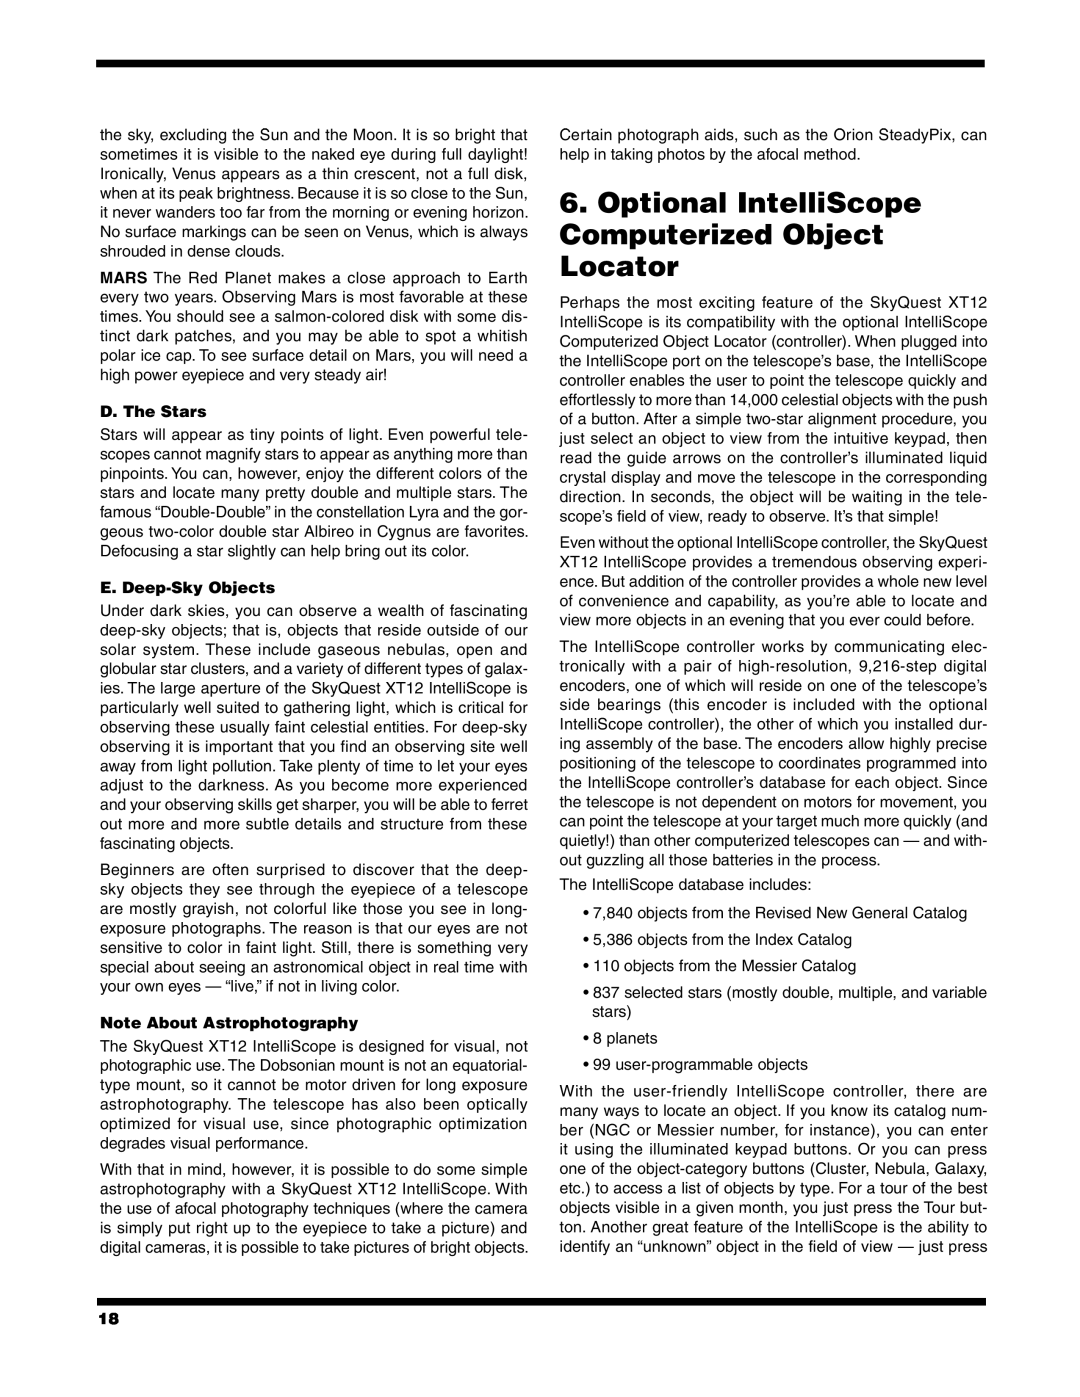 Orion XT12 instruction manual D. The Stars, E. Deep-SkyObjects, Note About Astrophotography 